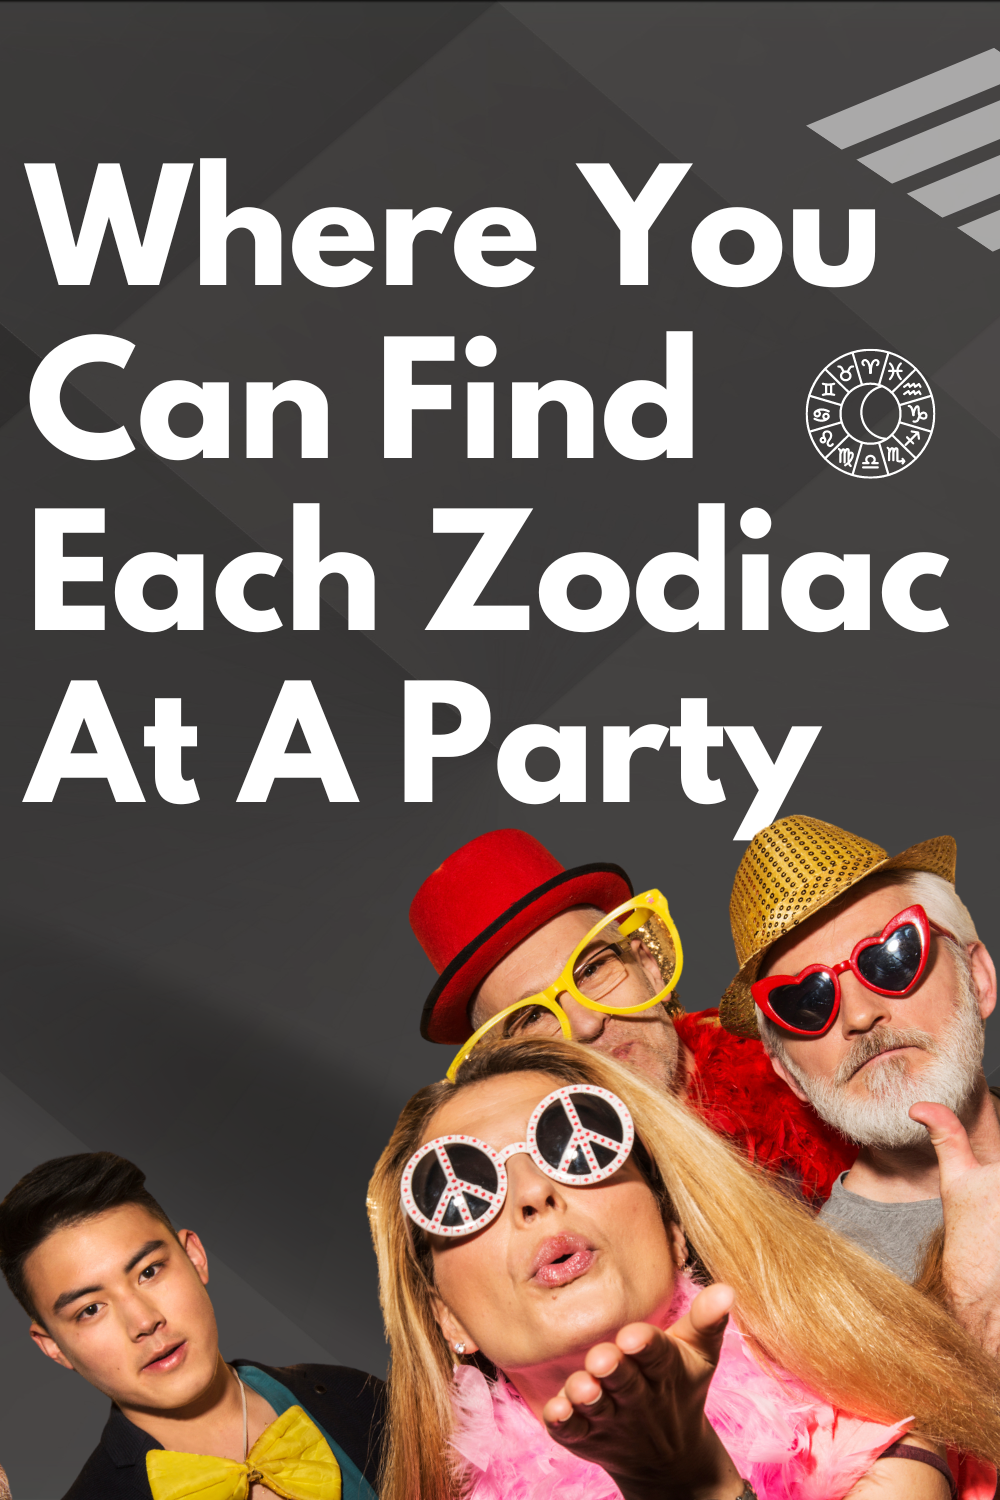 Where You Can Find Each Zodiac At A Party